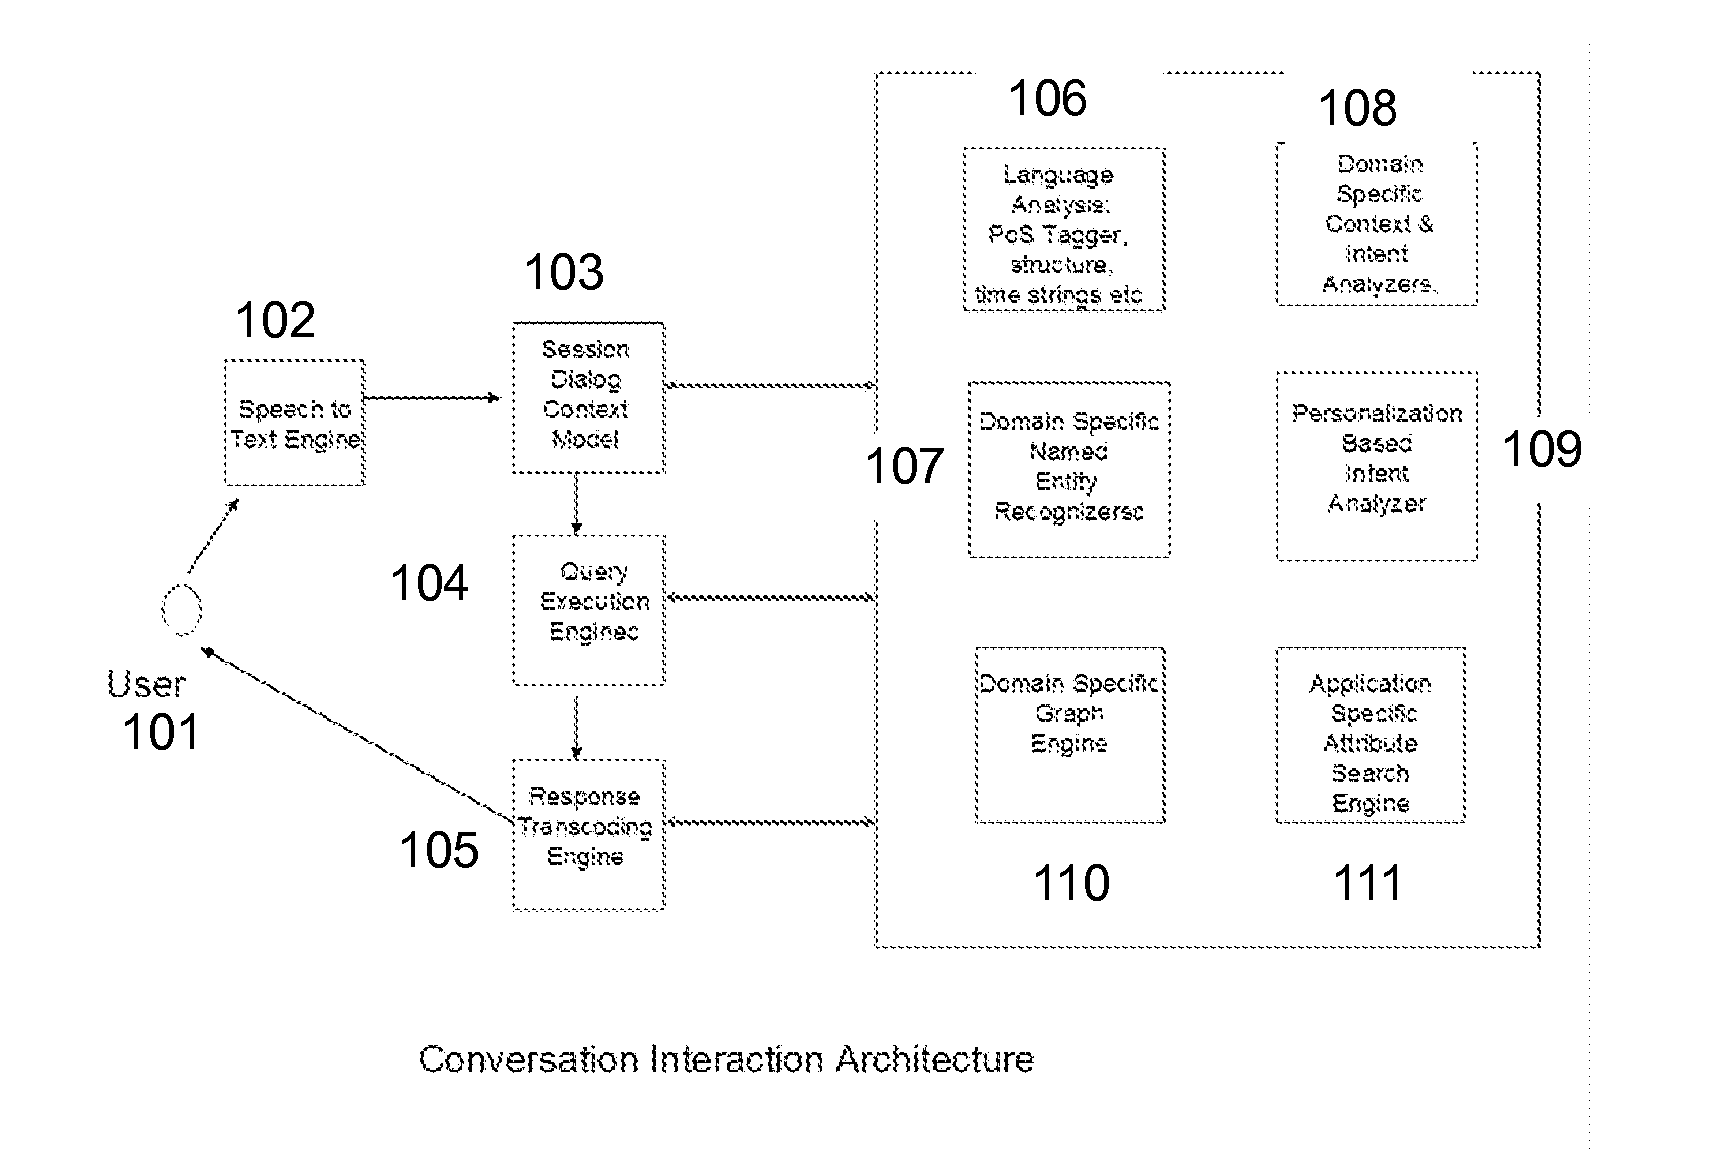 Method for adaptive conversation state management with filtering operators applied dynamically as part of a conversational interface